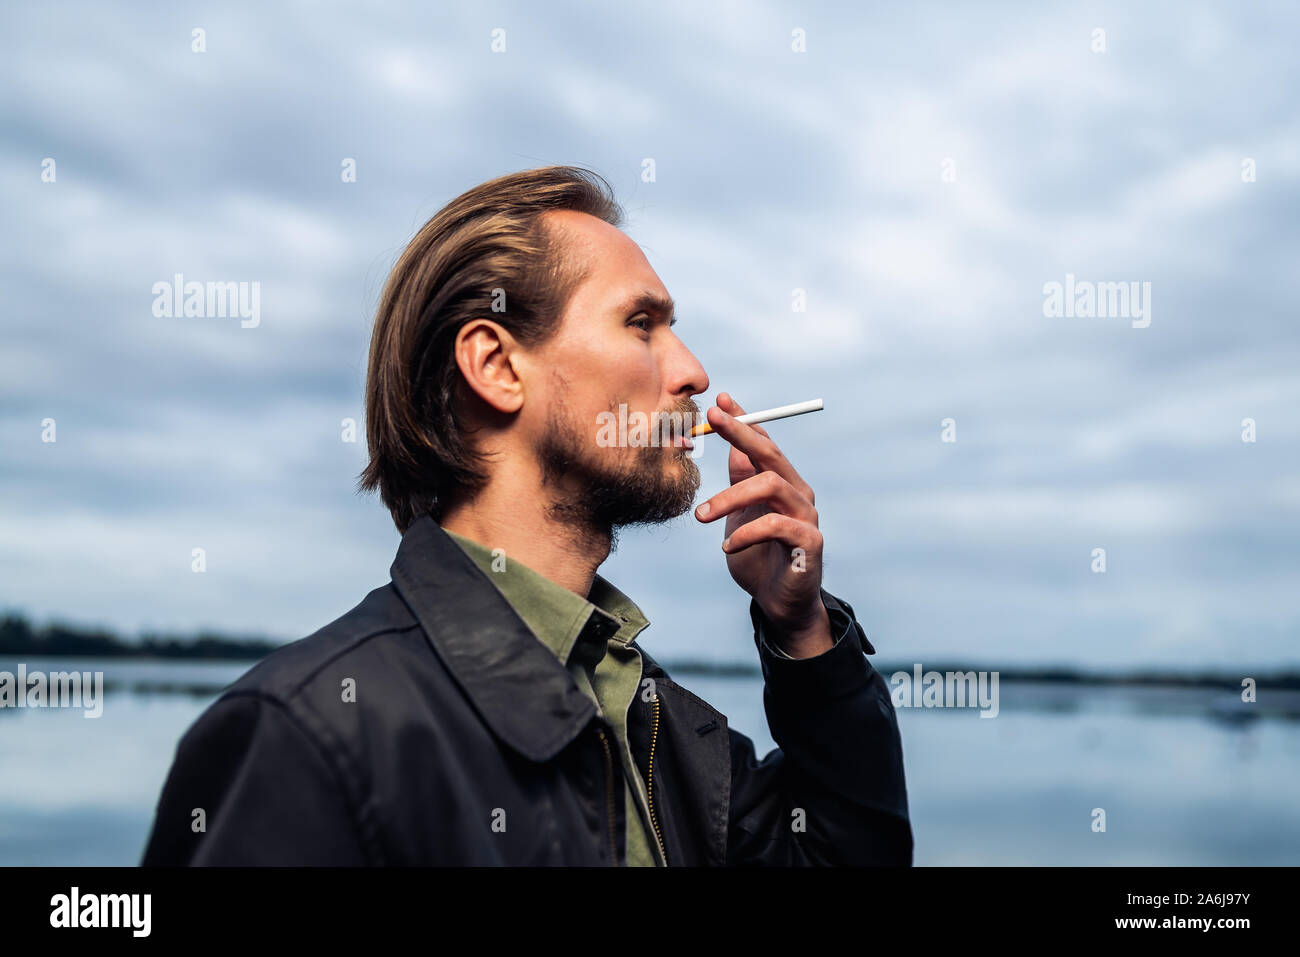 Photo of a young bearded man smoking a cigarette. Lake and clouds in the background. Stock Photo